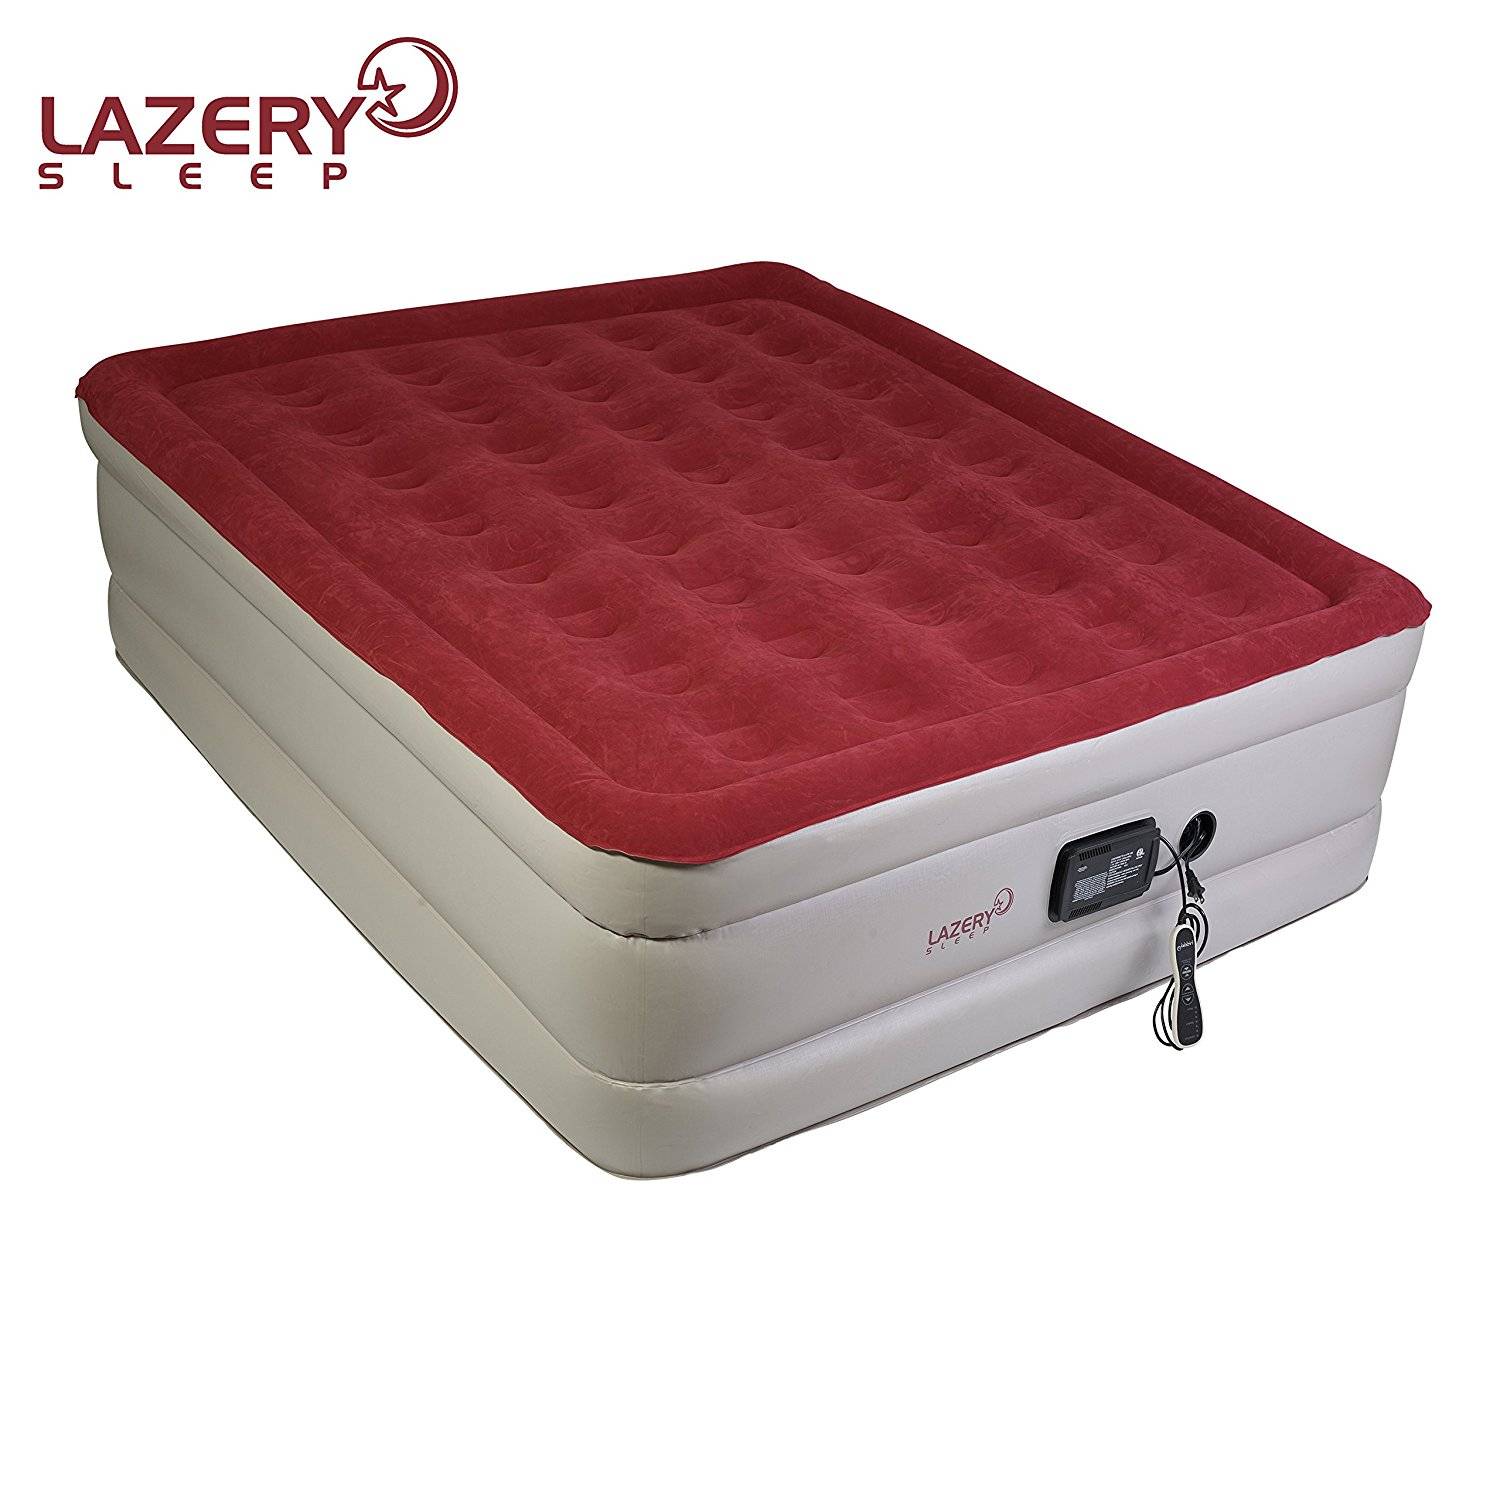 Lazery Sleep Raised Electric Airbed With Built In Pump